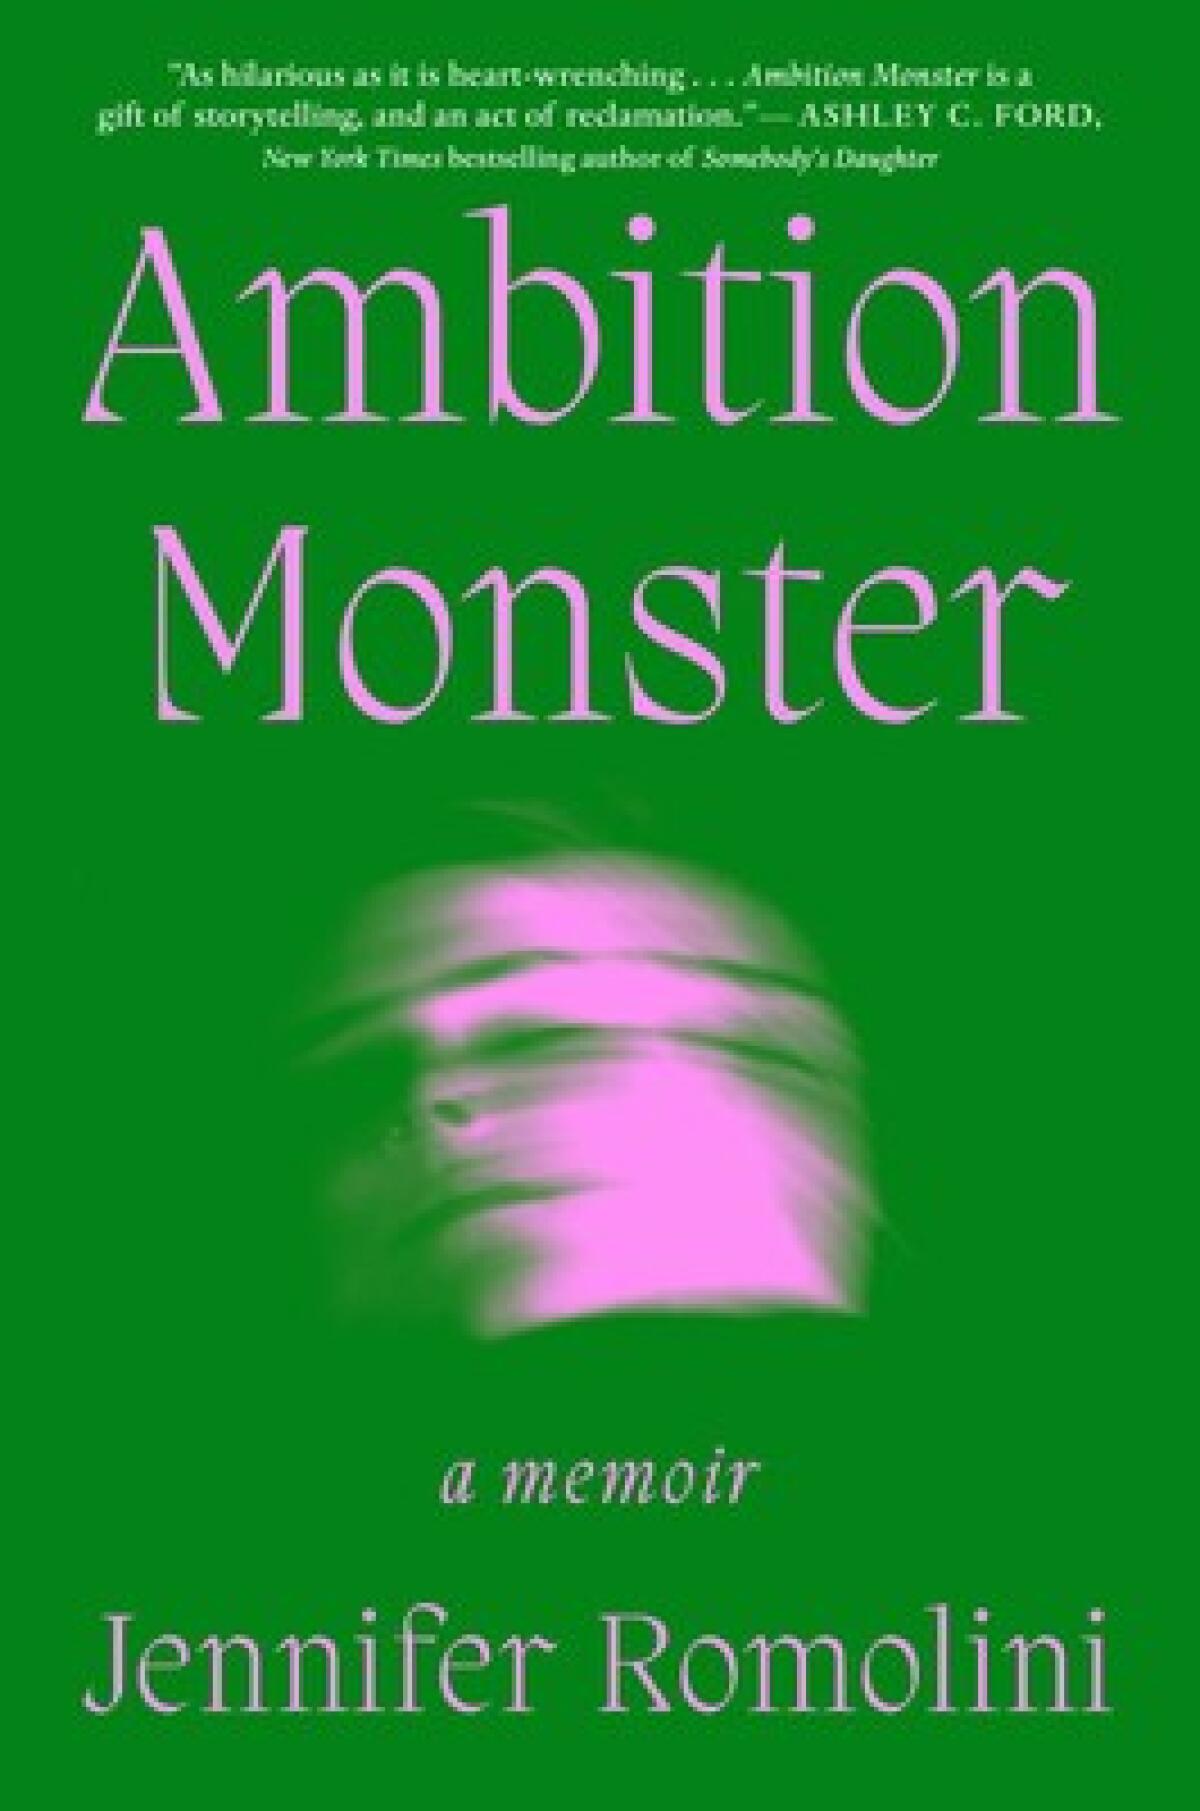 Cover from "Monster Ambition"